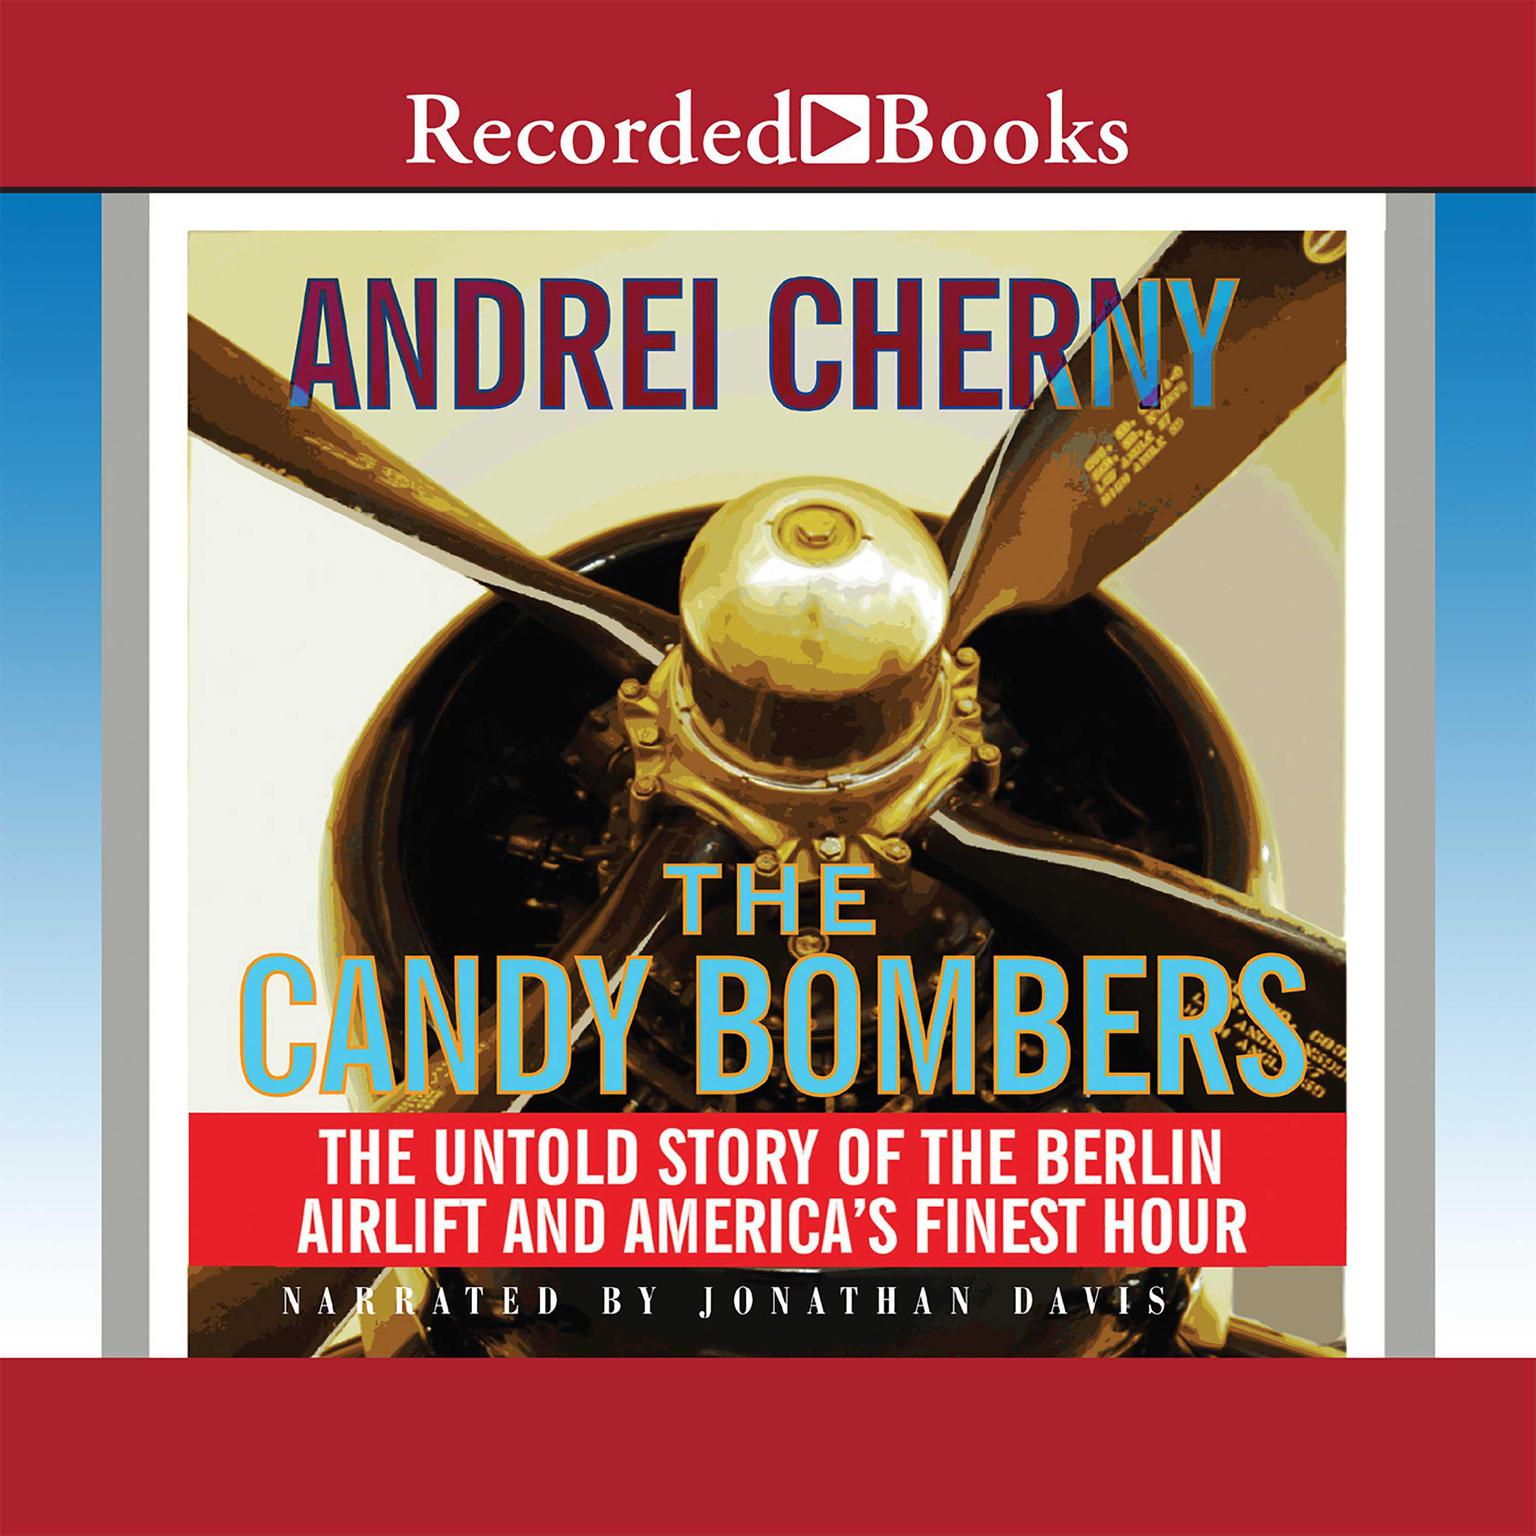 The Candy Bombers: The Untold Story of the Berlin Airlift and Americas Finest Hour Audiobook, by Andrei Cherny